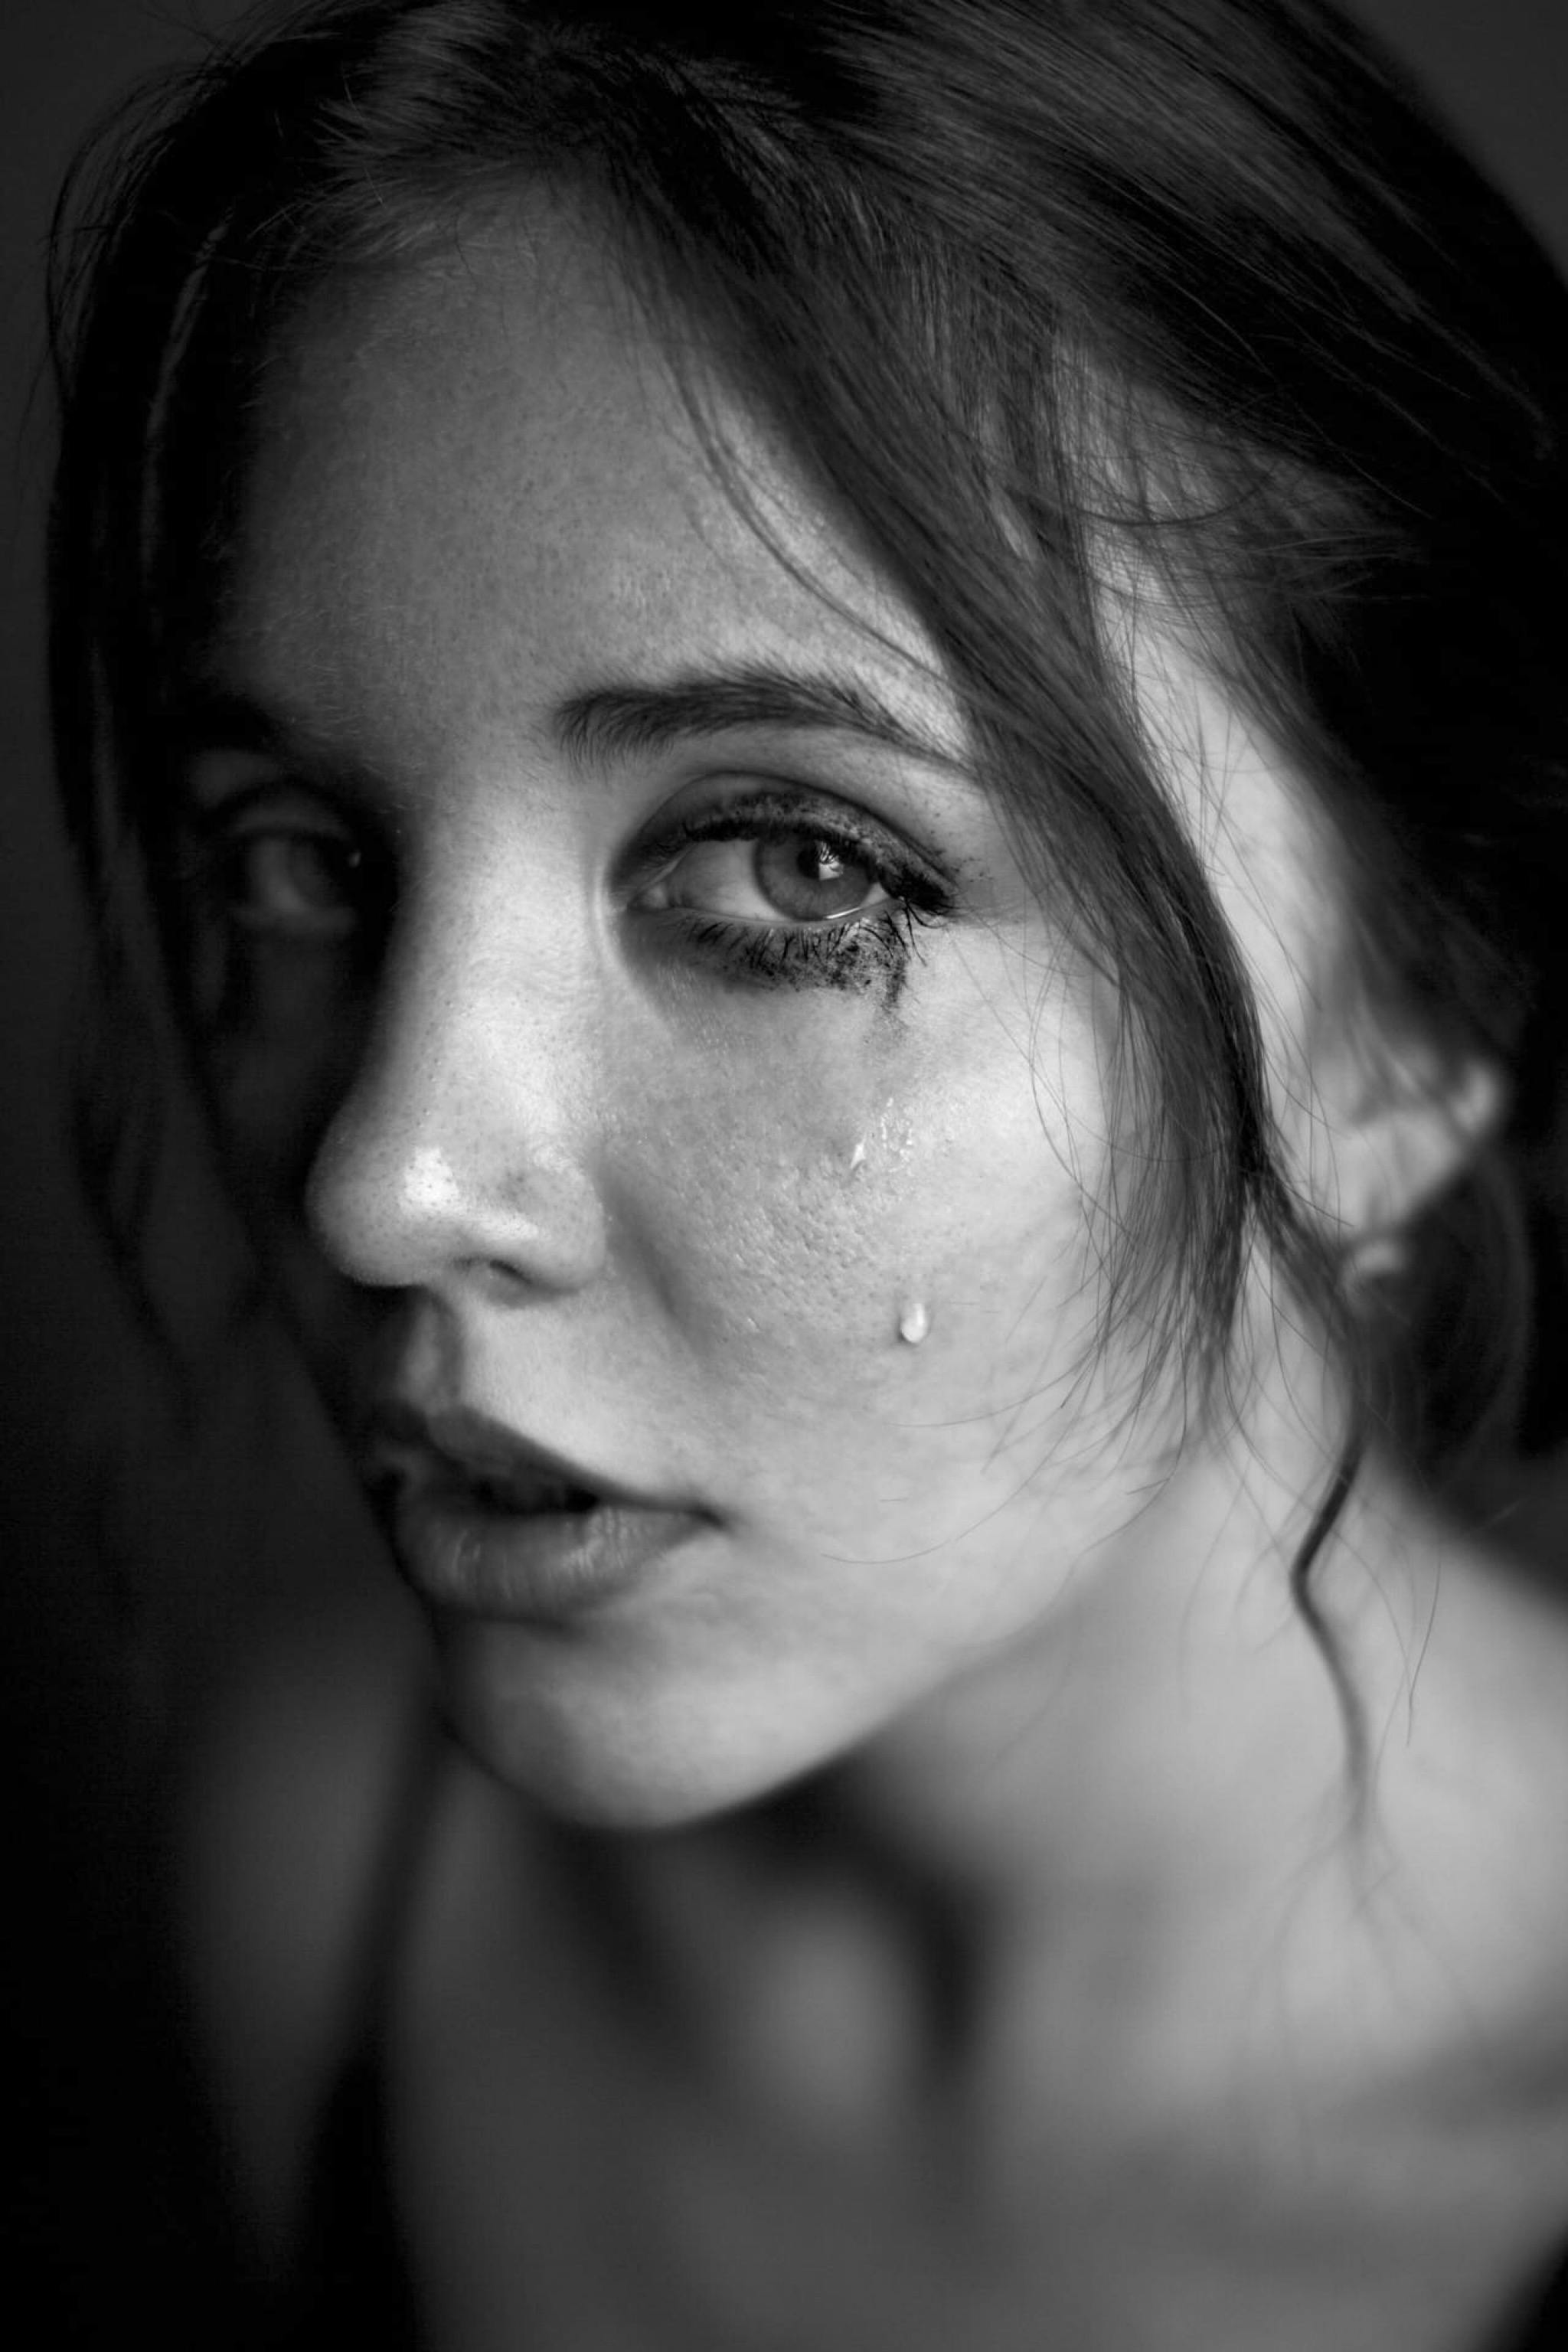 Black and white photo of a crying woman | Source: Pexels